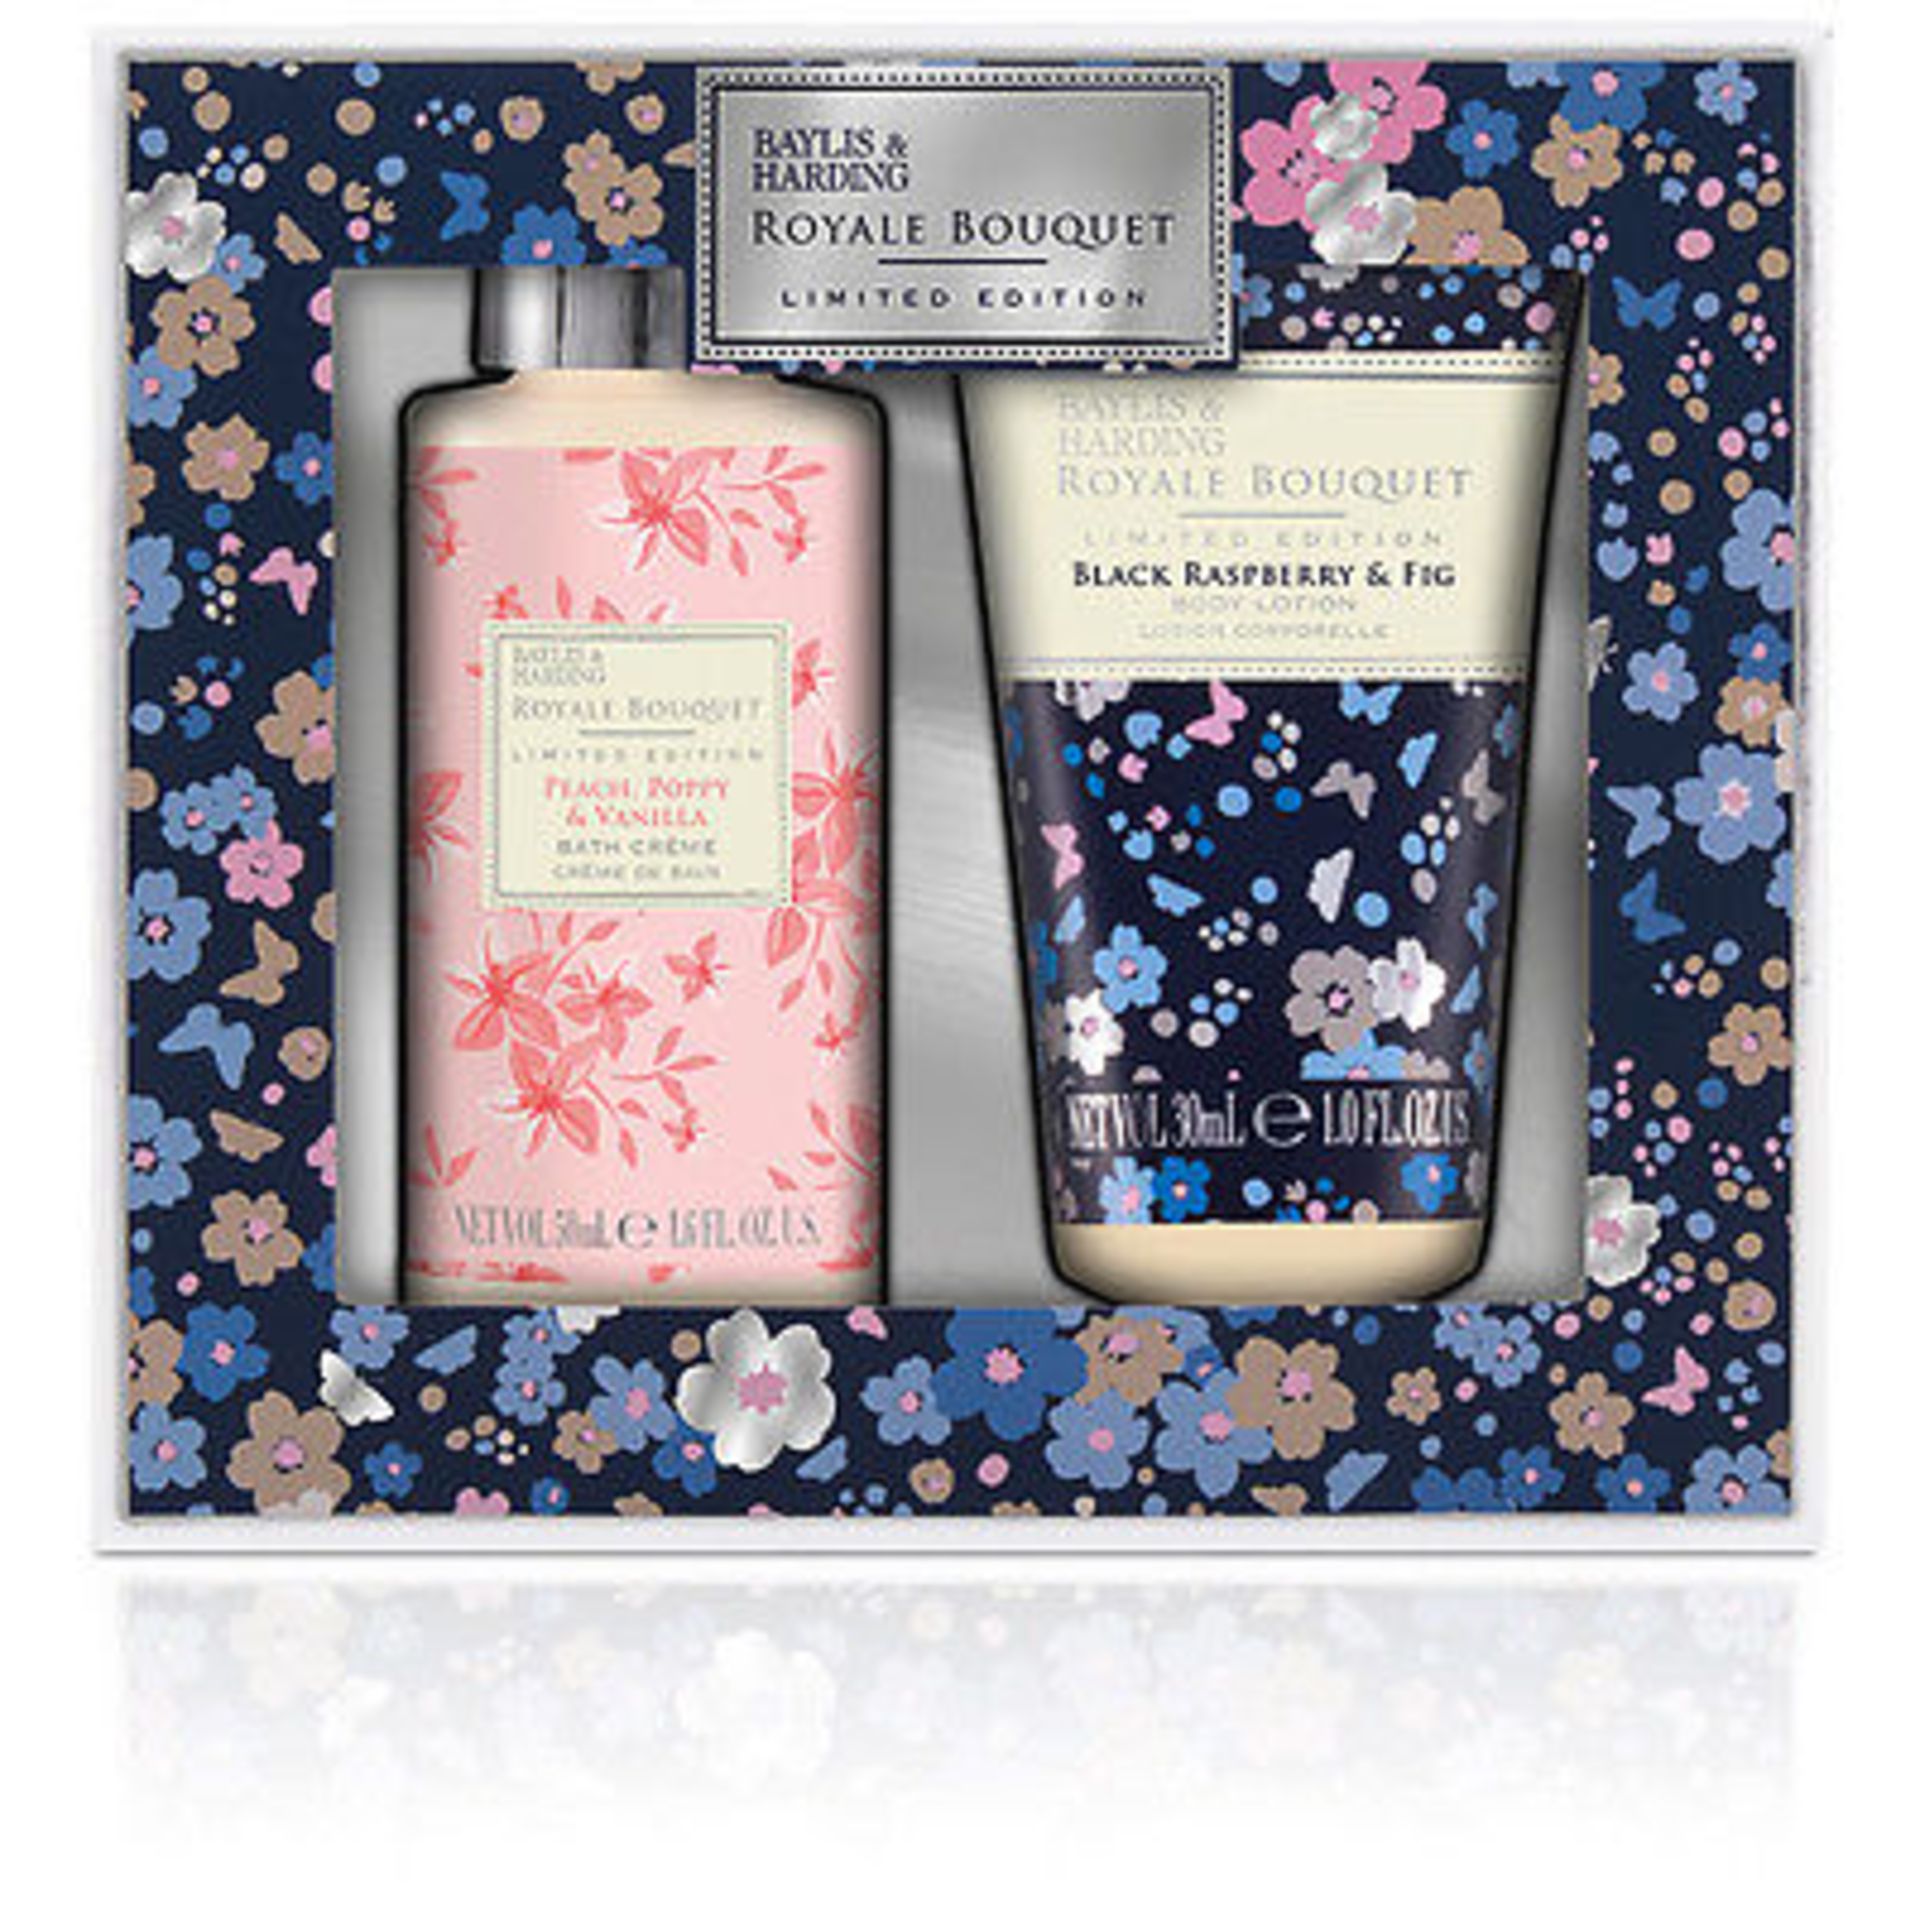 V Brand New Baylis & Harding Royale Bouquet Limited Edition Duo Set - Including 30ml Body Lotion and - Image 2 of 2